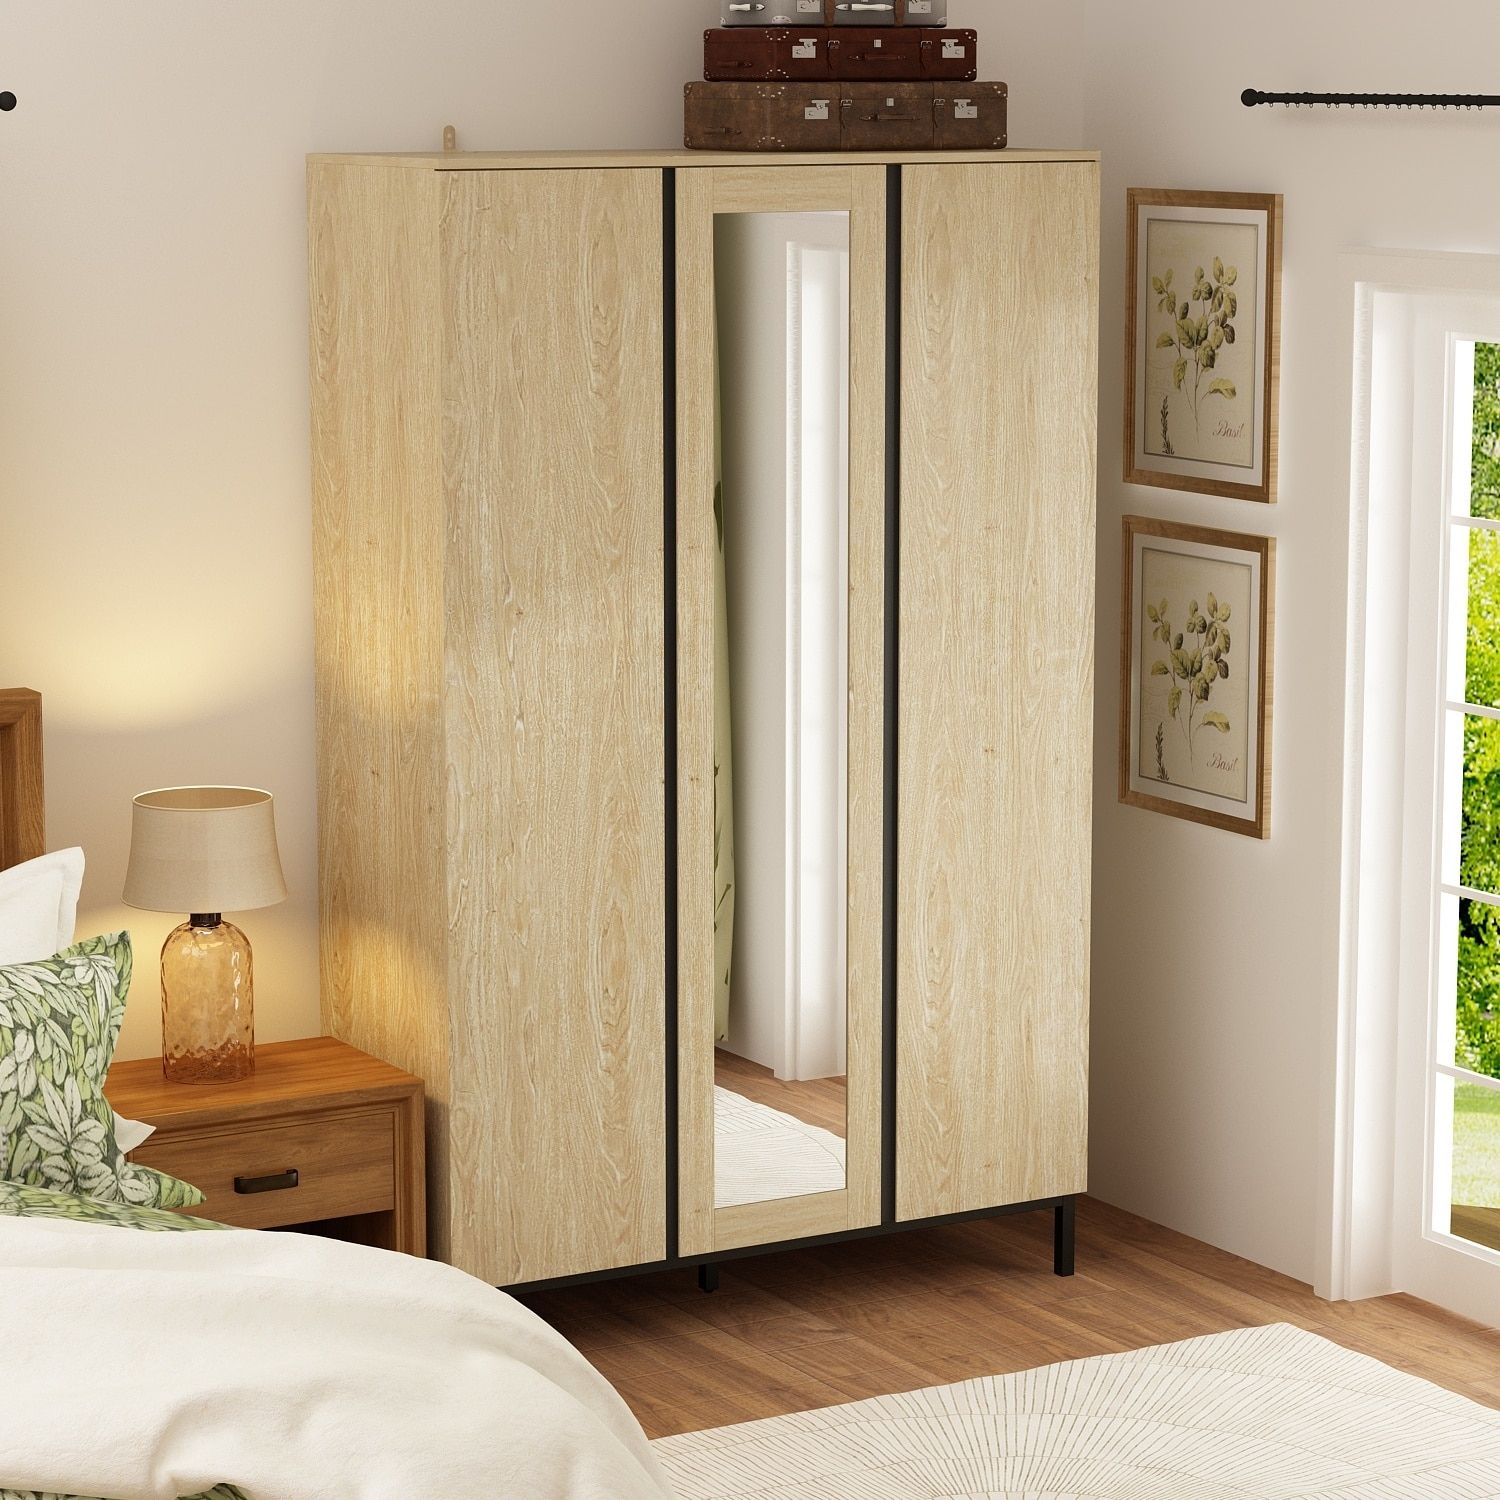 Armoire Wardrobes With Mirror Doors Closet Hanging Wood Finish 3 Doors –  Bed Bath & Beyond – 37250843 In 3 Doors Wardrobes With Mirror (View 14 of 15)